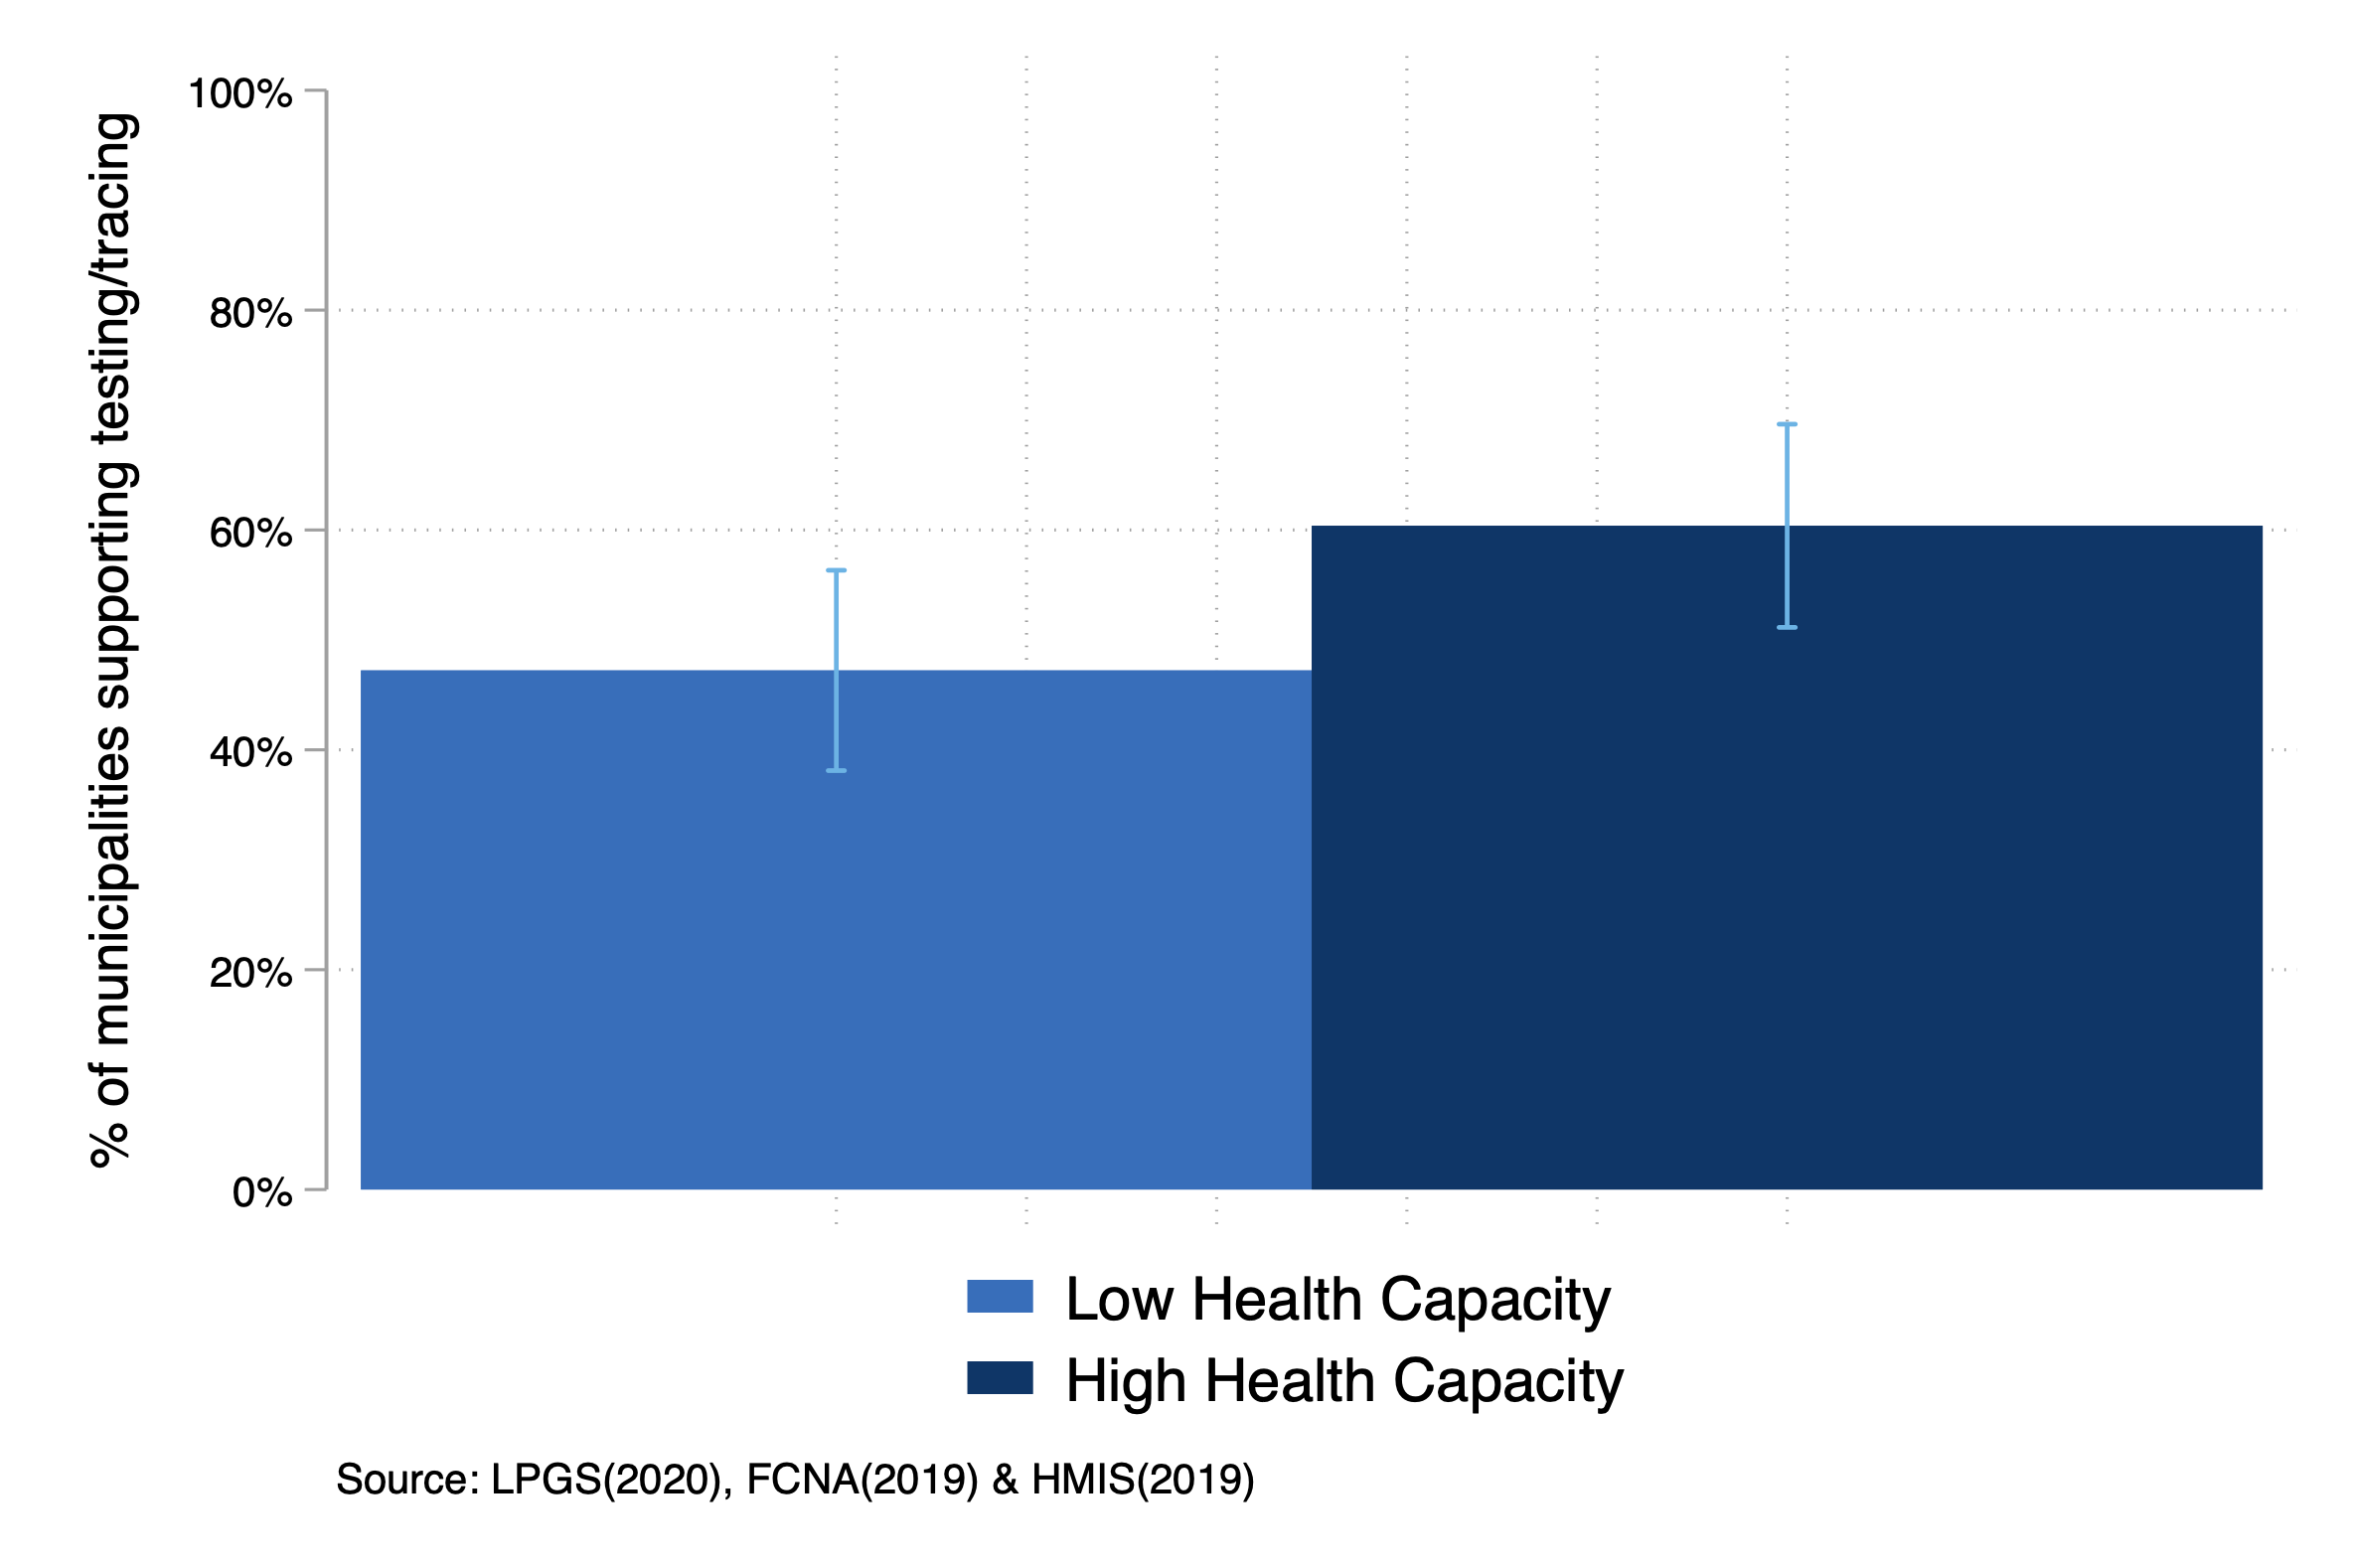 Bar chart showing % of municipalities supporting testing/tracing by low and high health capacity